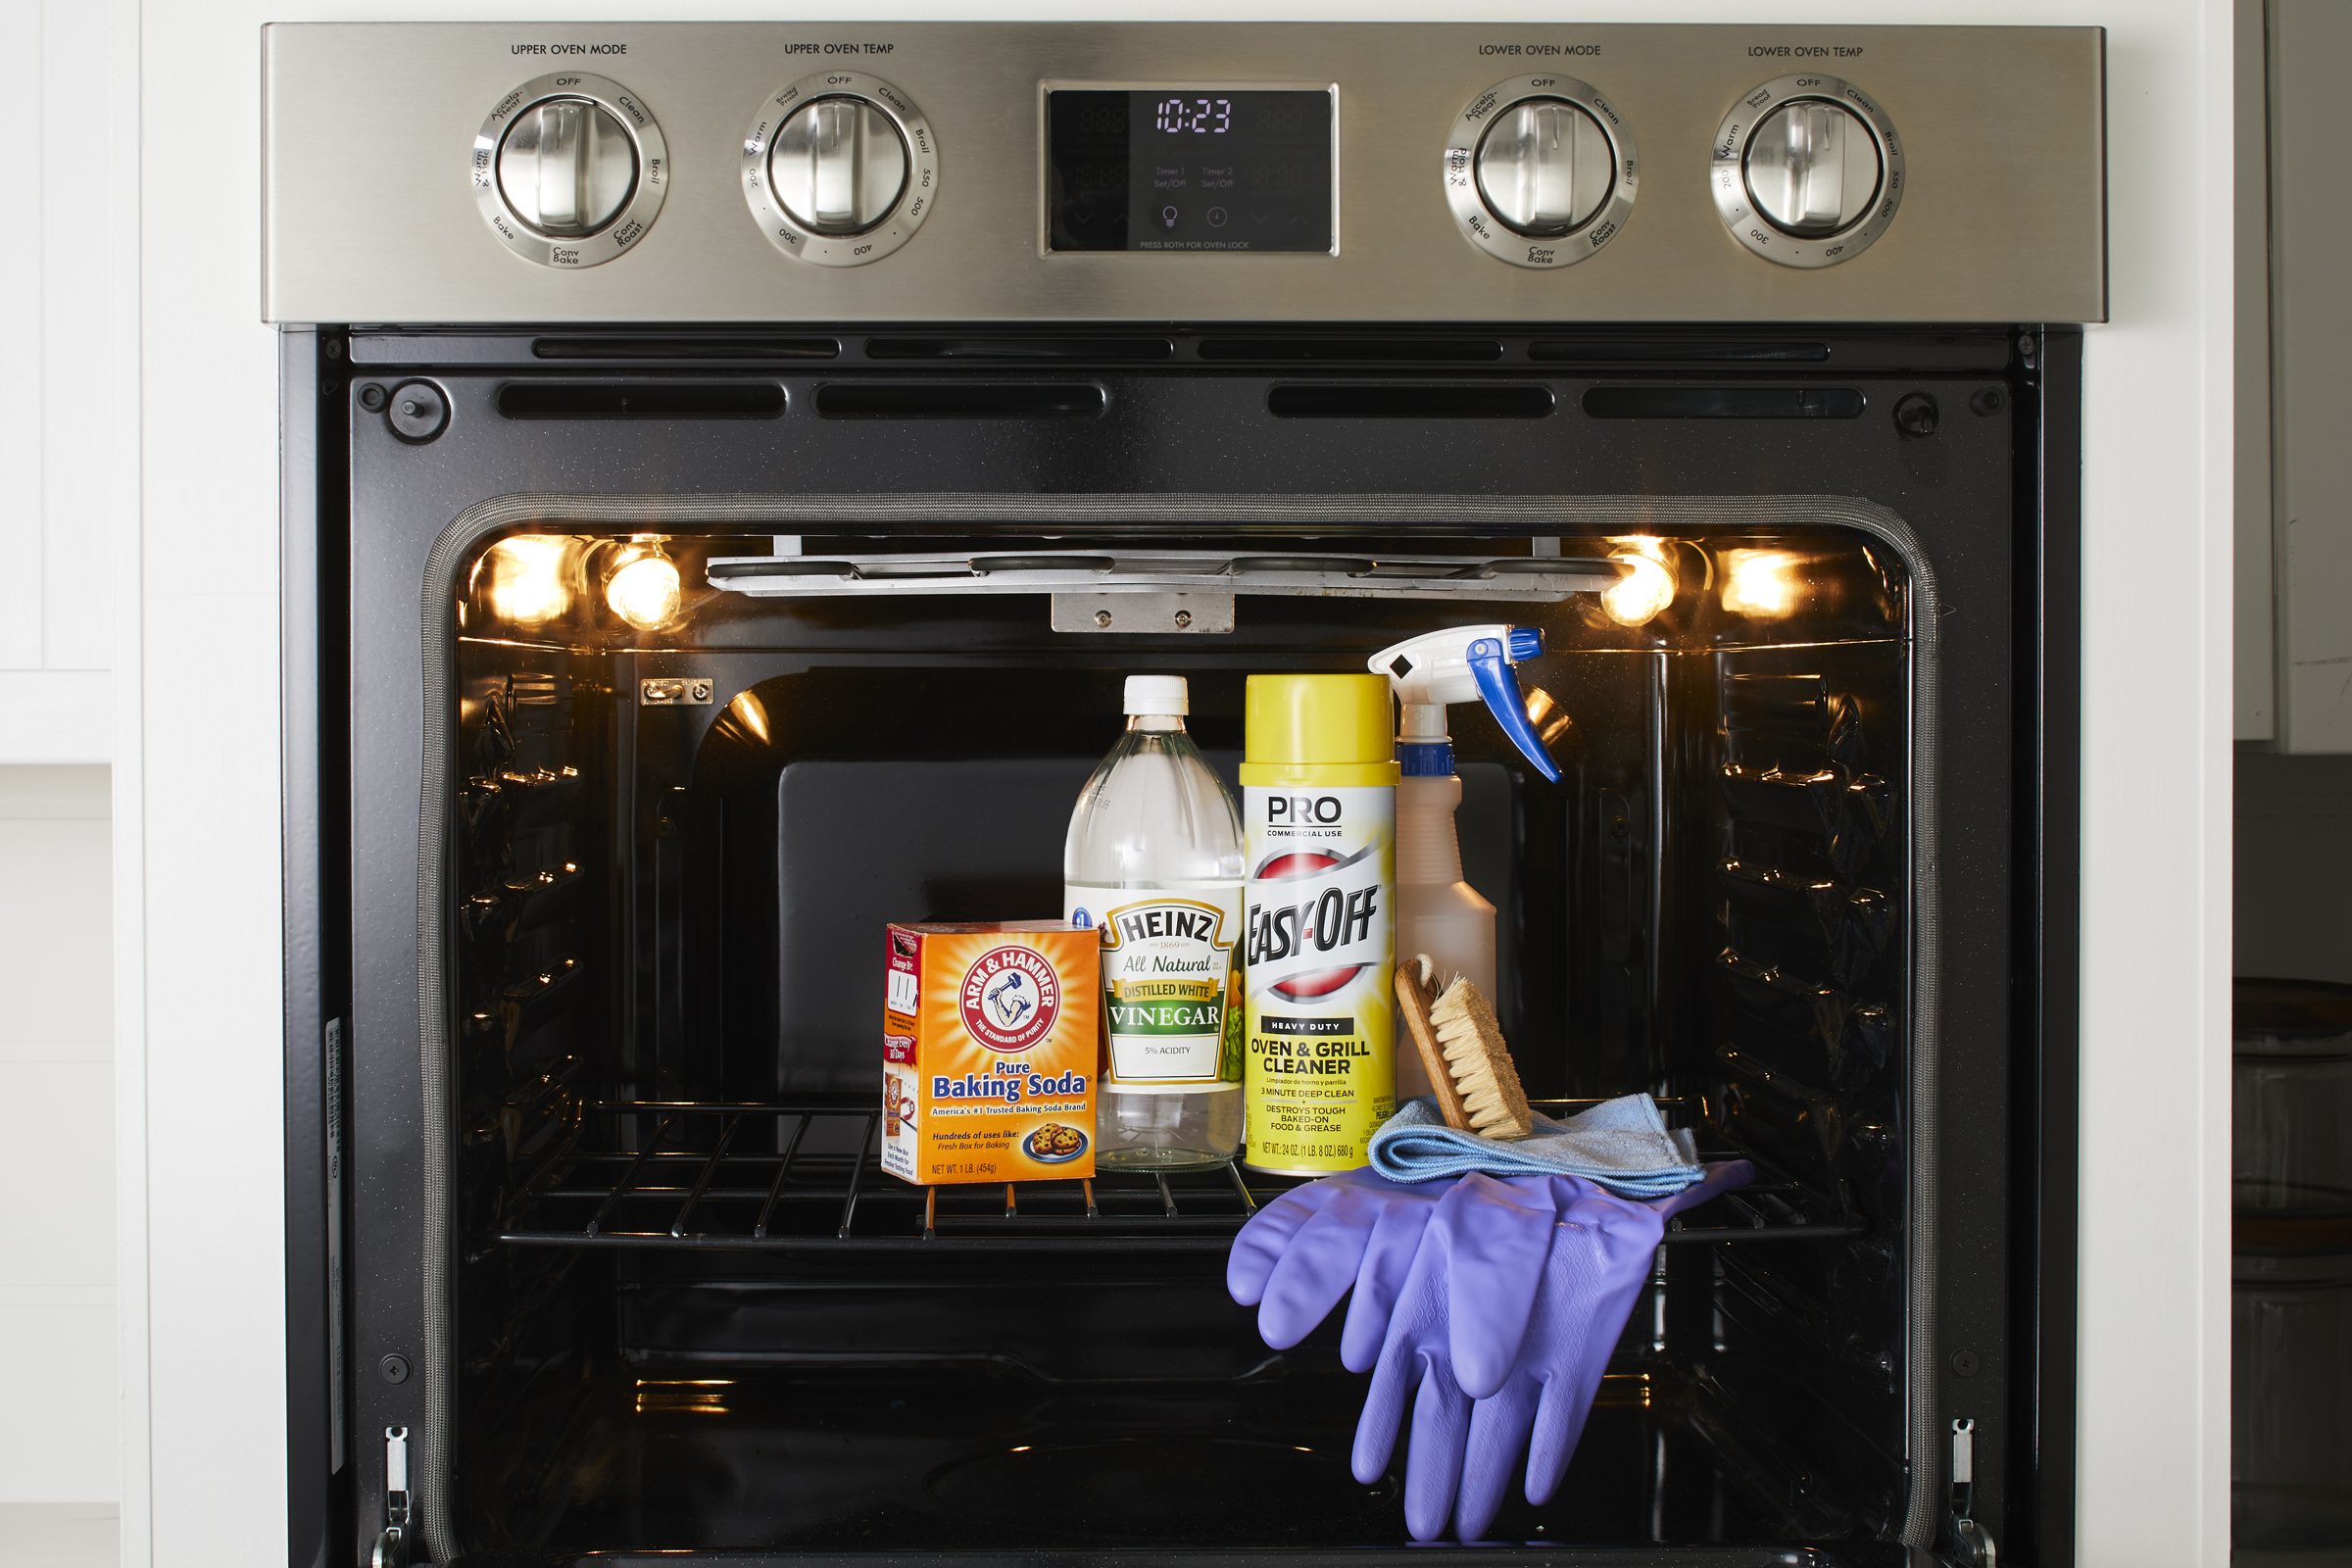 https://www.rd.com/wp-content/uploads/2021/04/cleaning-supplies-in-oven_RDigital_HubCleaning_Oven_002.jpg